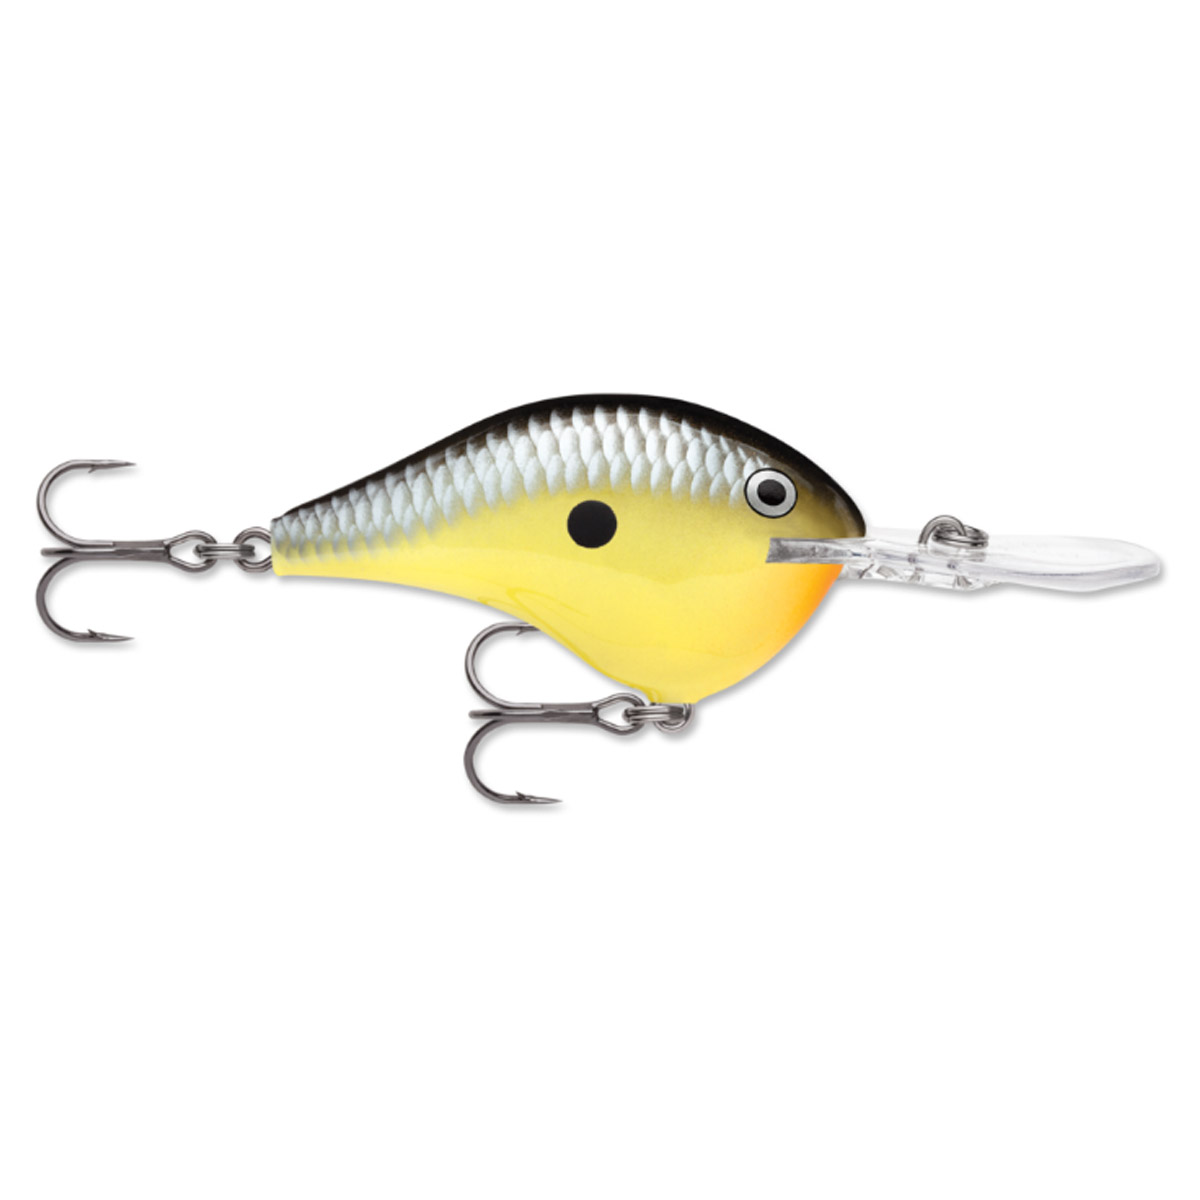 Rapala Dives-To DT14